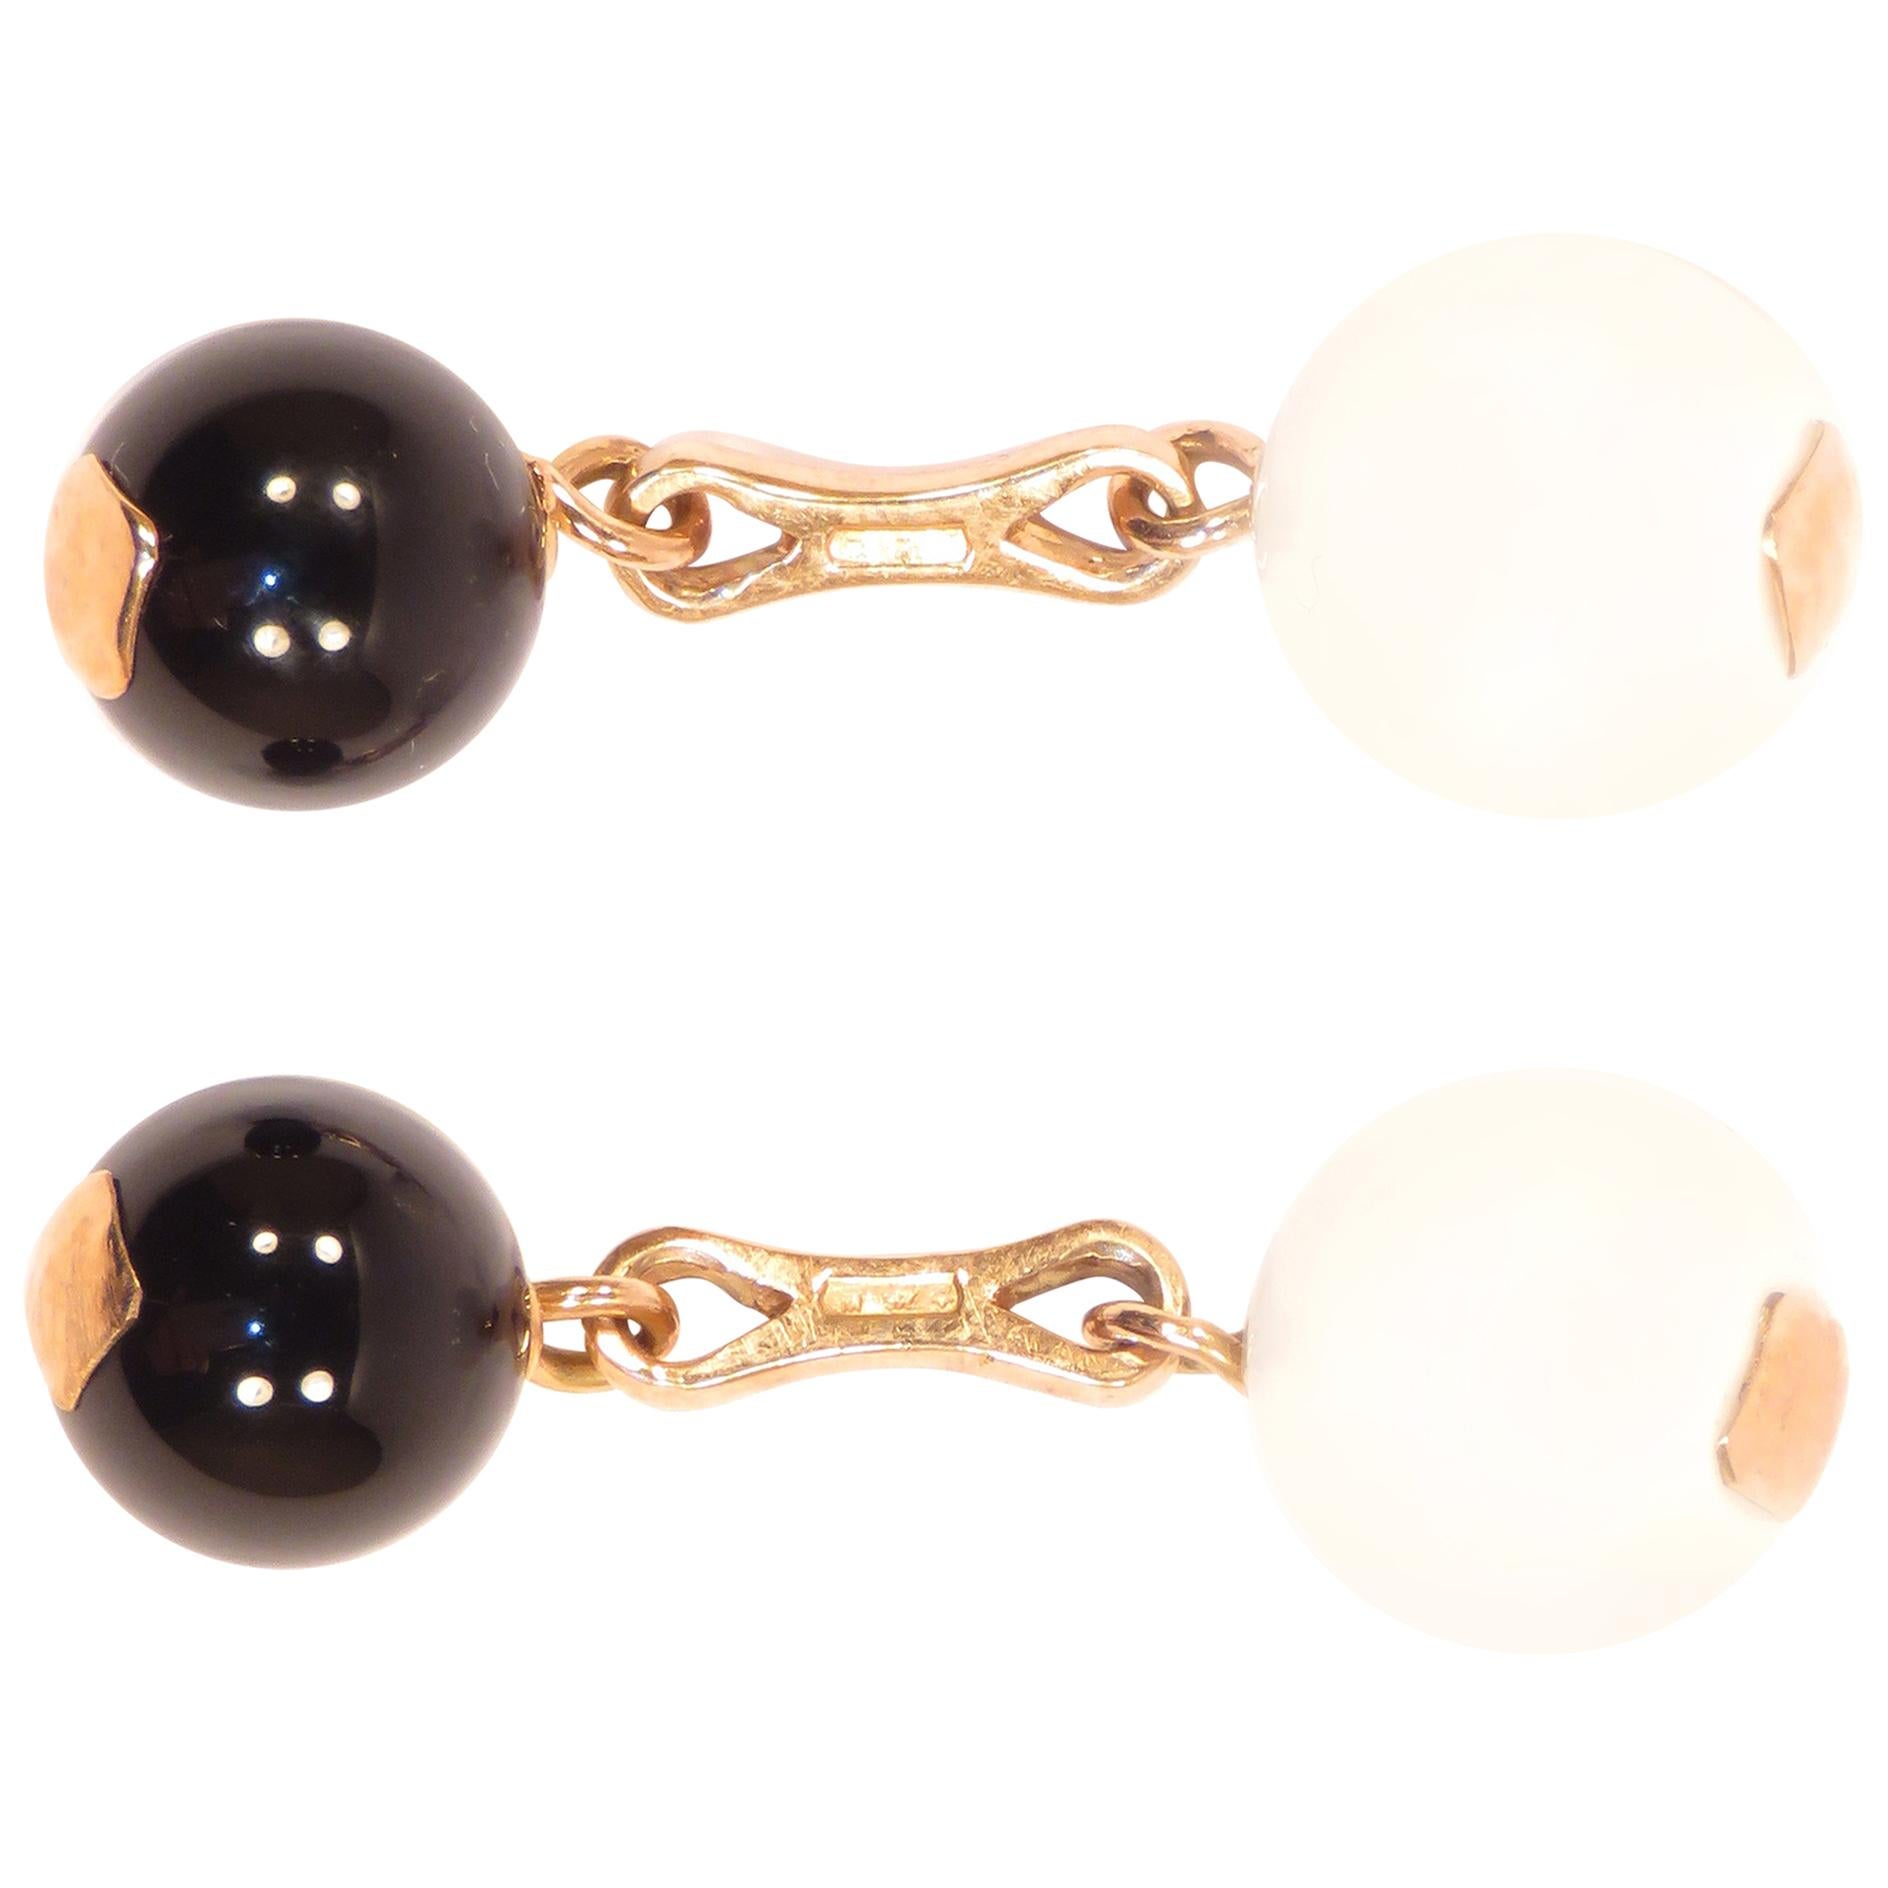 White Agate Onyx Rose Gold Cufflinks Handcrafted in Italy by Botta Gioielli